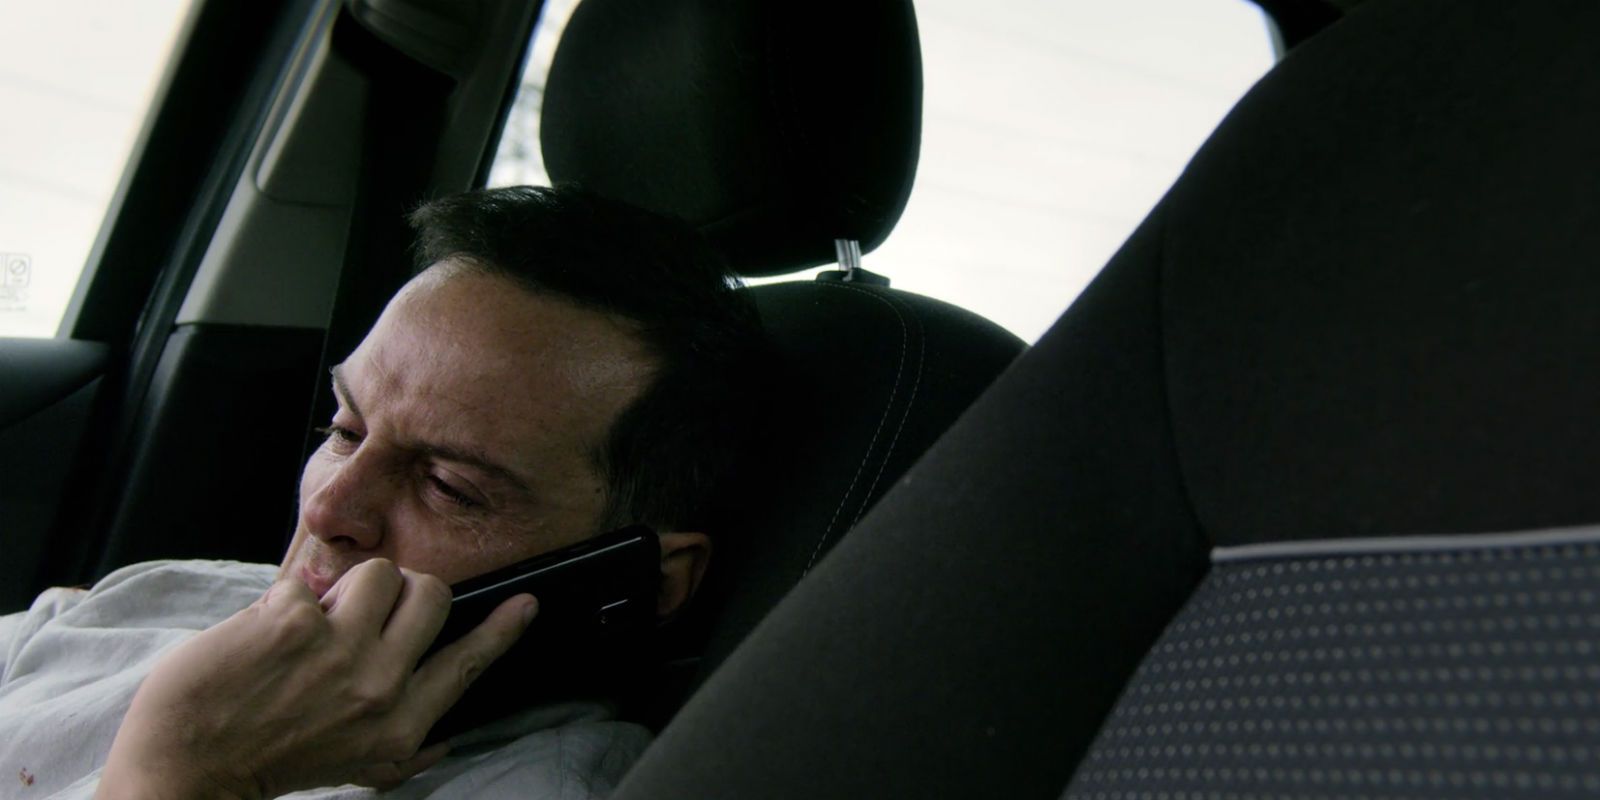 Scott Smithereens on the phone and hiding in the car in Black Mirror